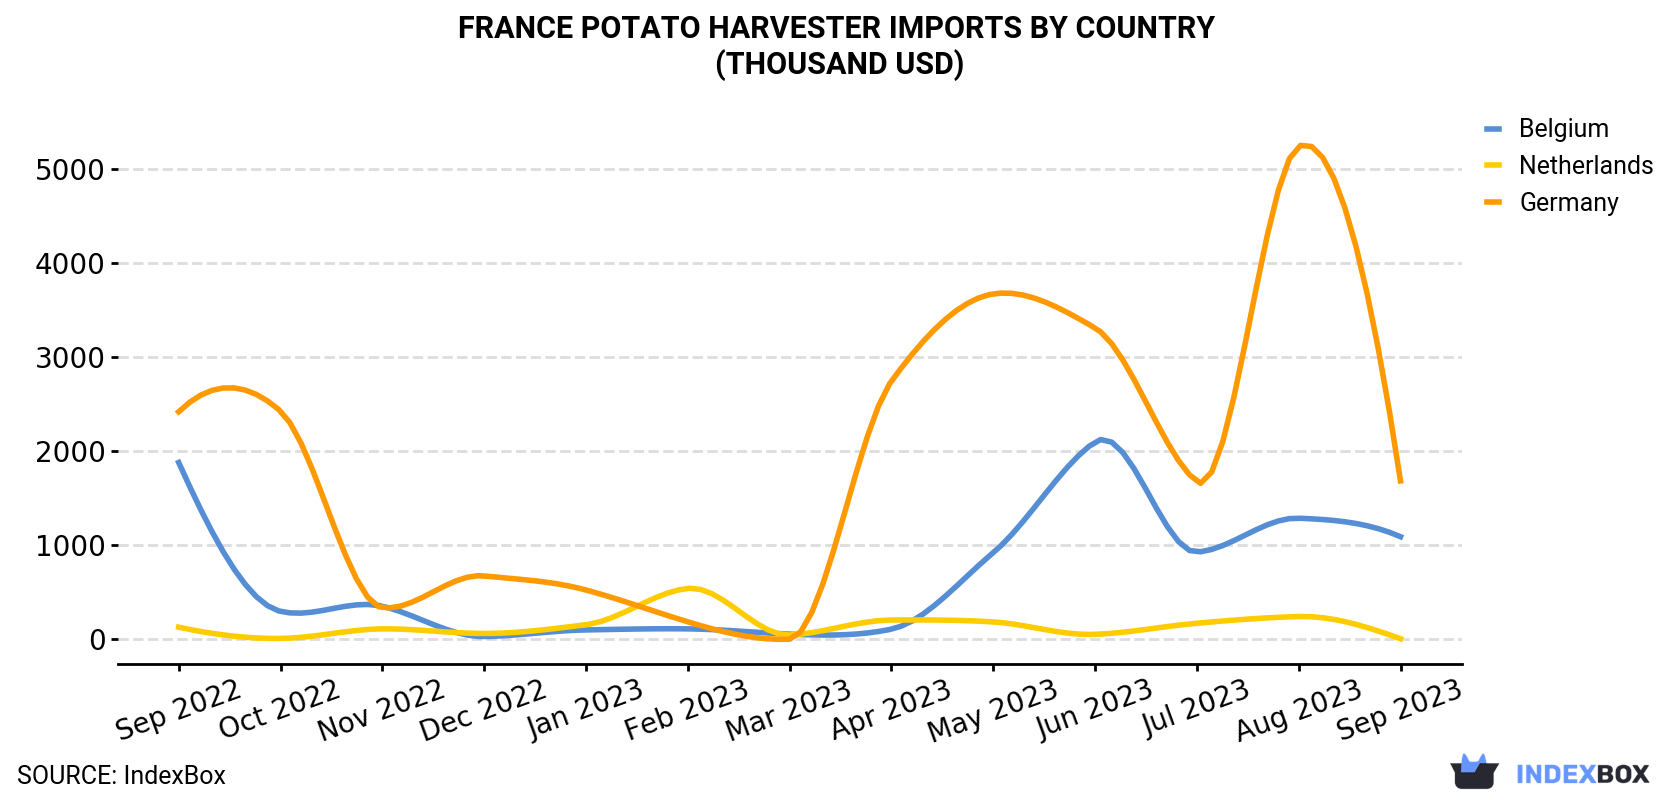 France Potato Harvester Imports By Country (Thousand USD)